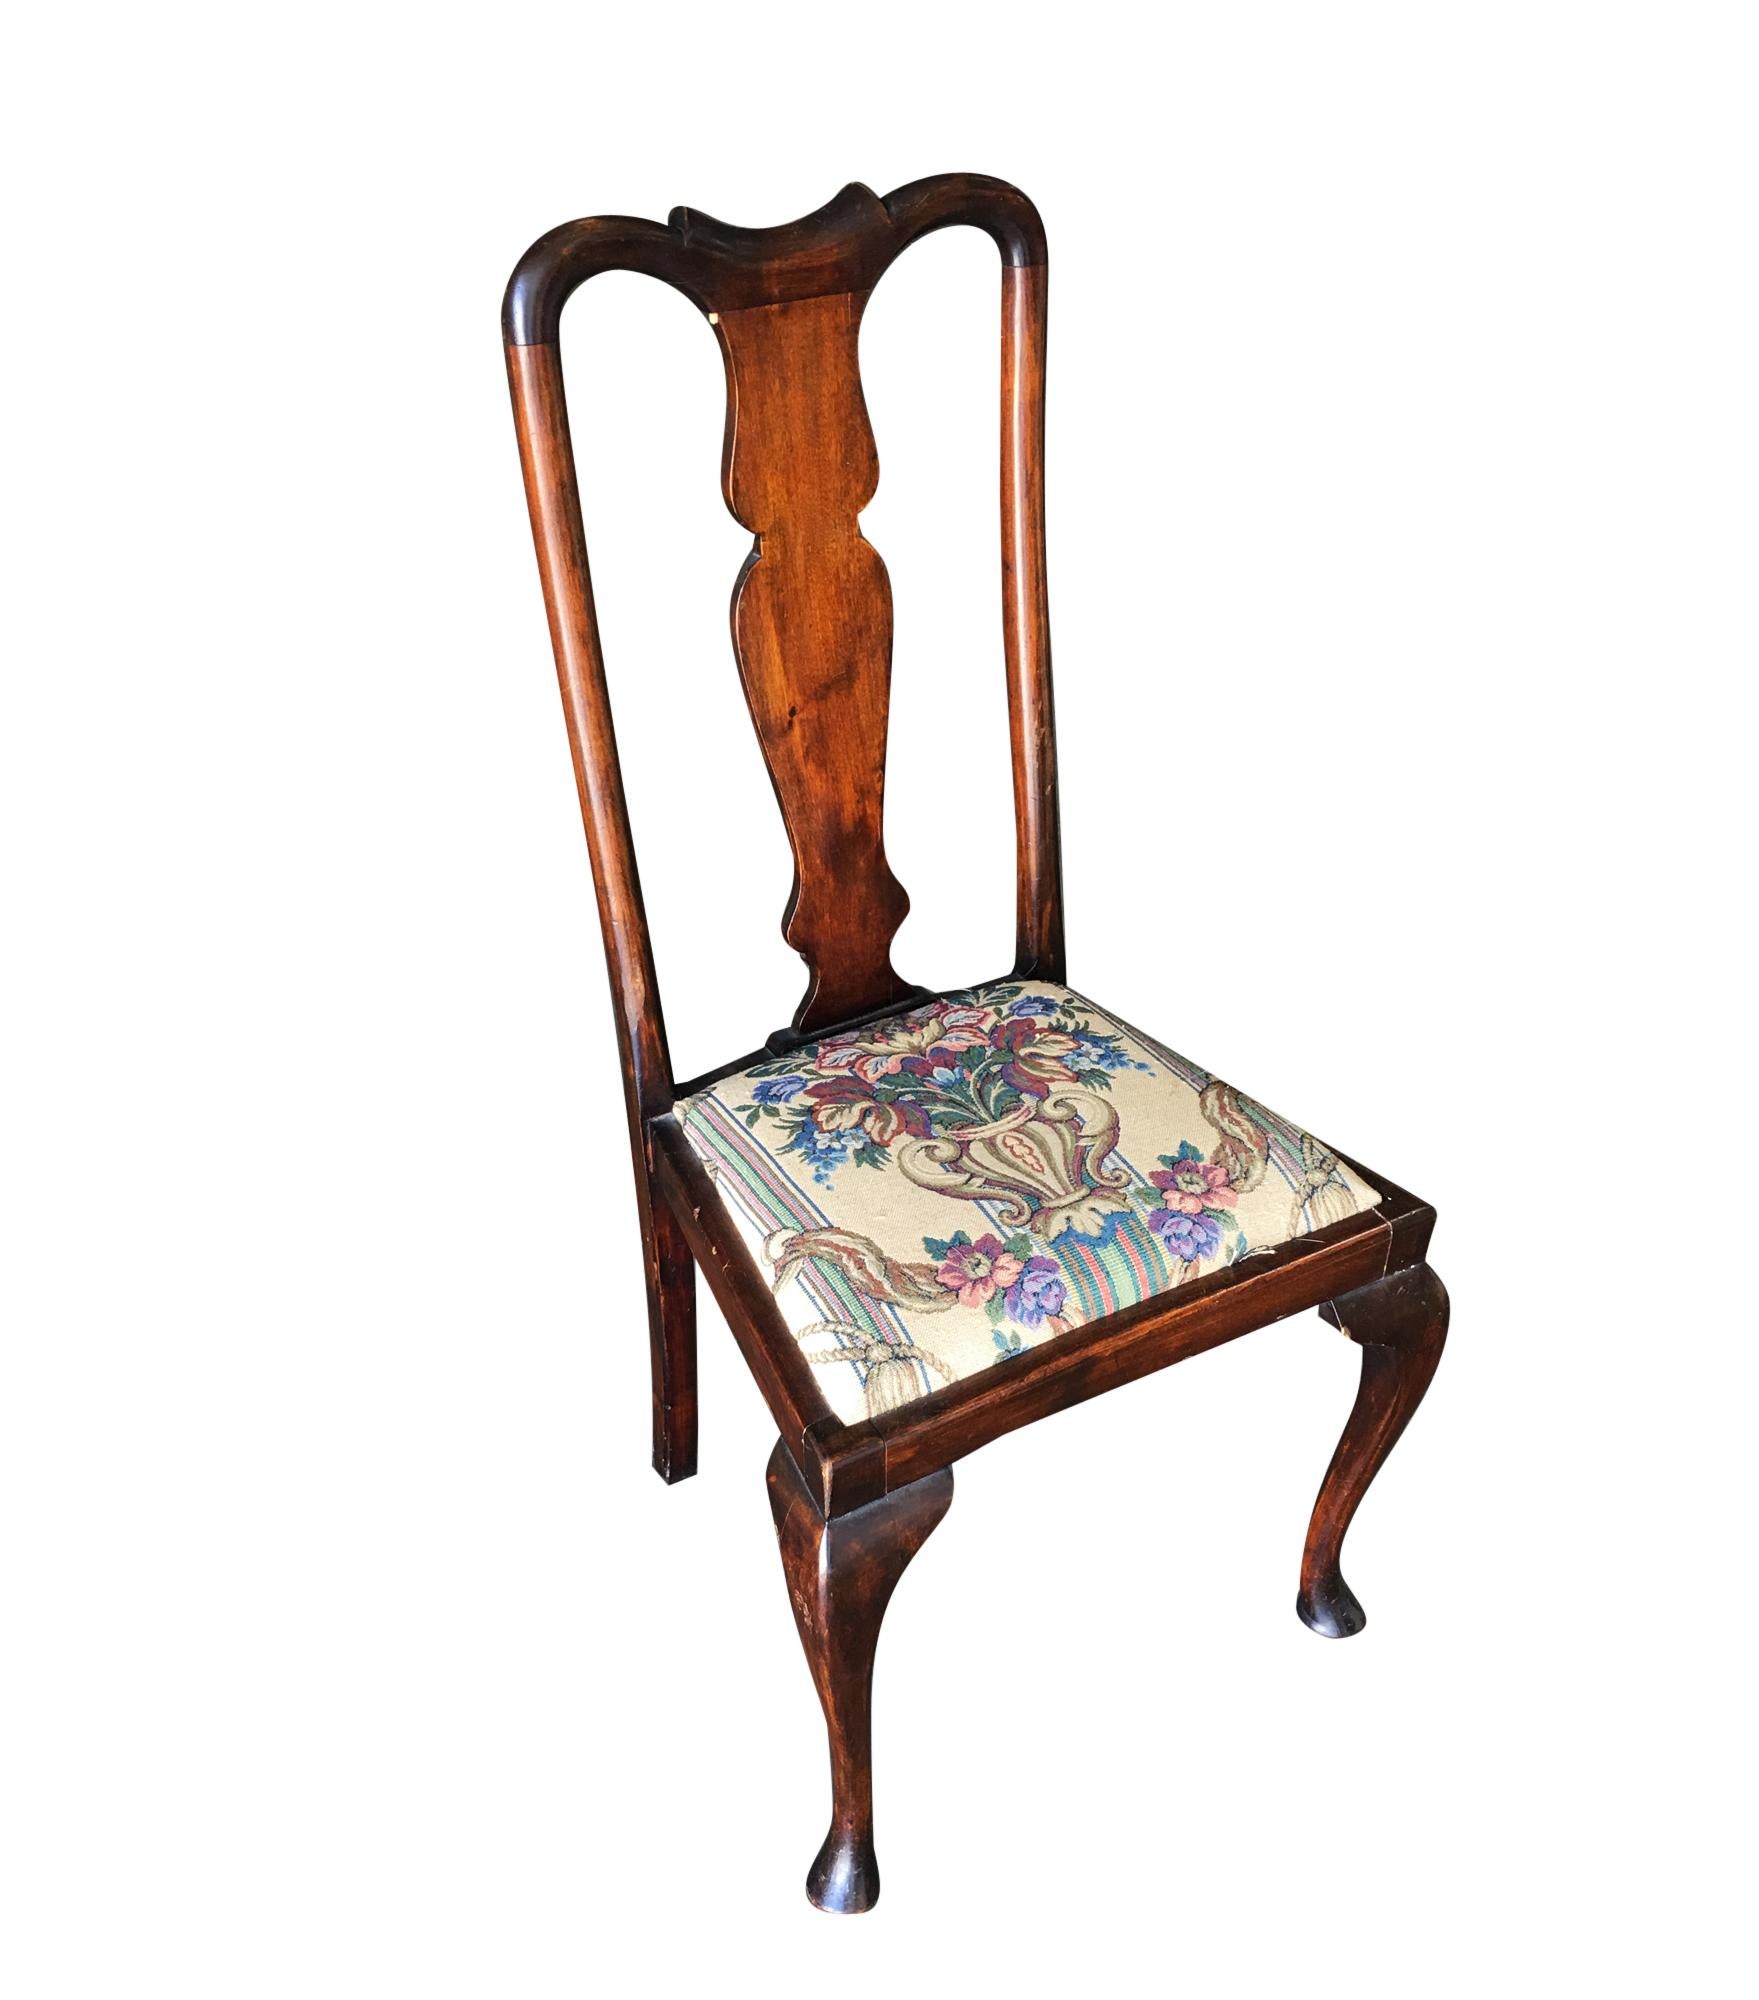 Set of four mahogany Art Deco era dining room chairs, each with petite sculpted seat back and tapestry style seat covers. Circa 1940. These chairs have some scratches on the wooden frames, which we can refinish before shipping out.

Dimensions: